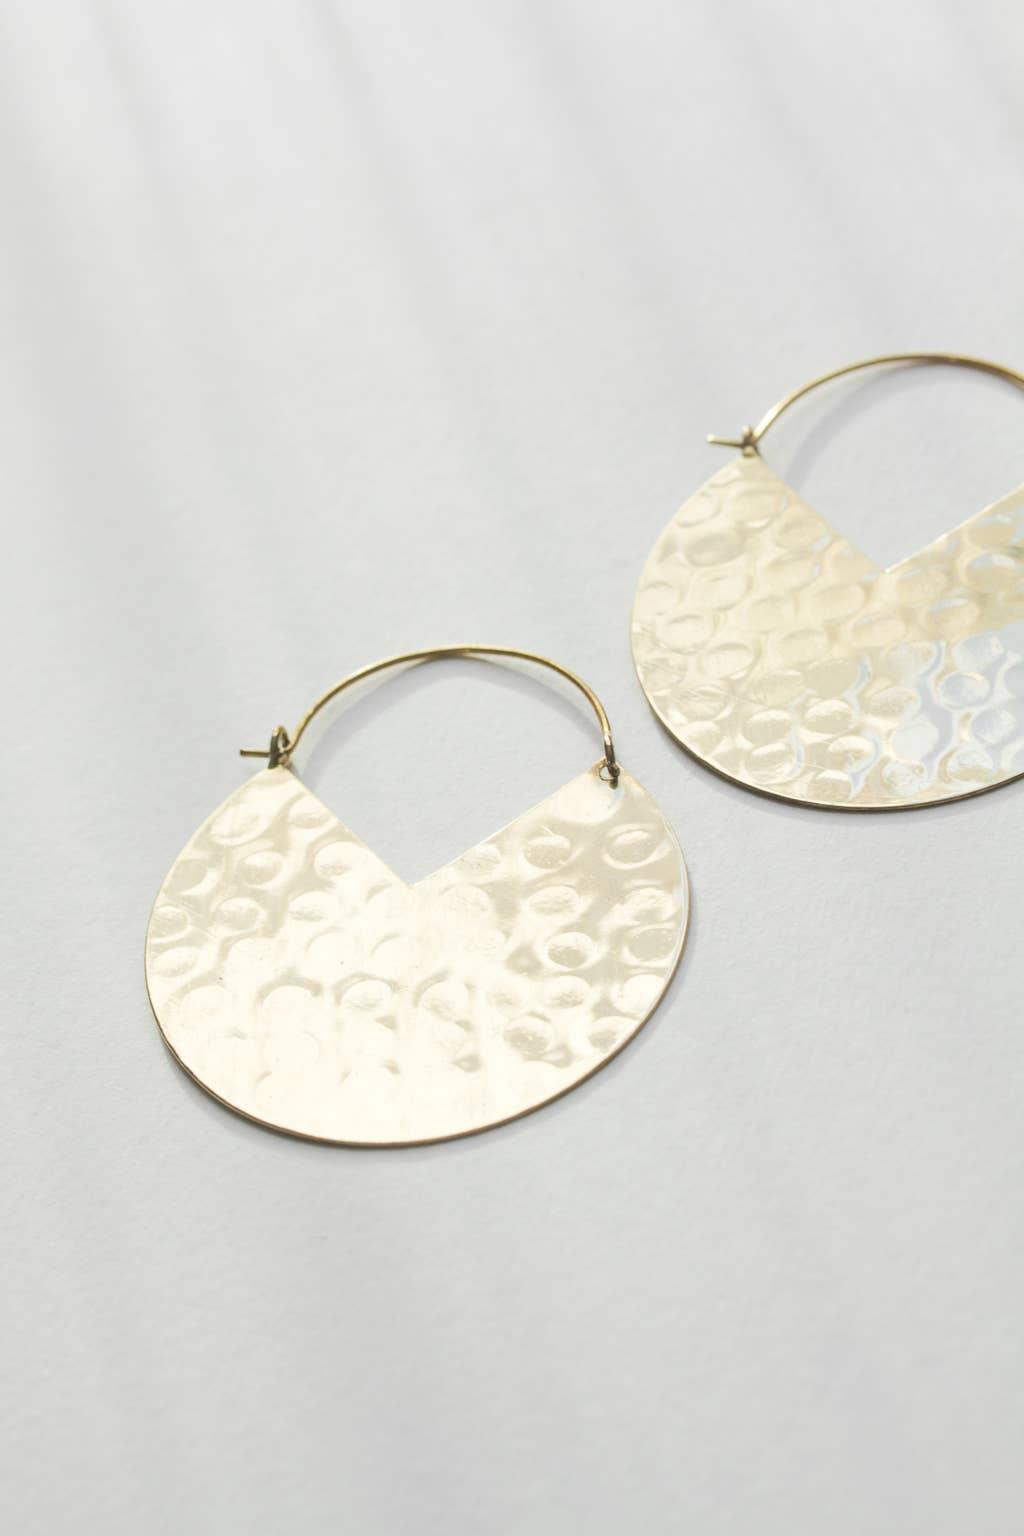 Pacman Hoop Earrings (3 sizes) - Ethical Trade Co